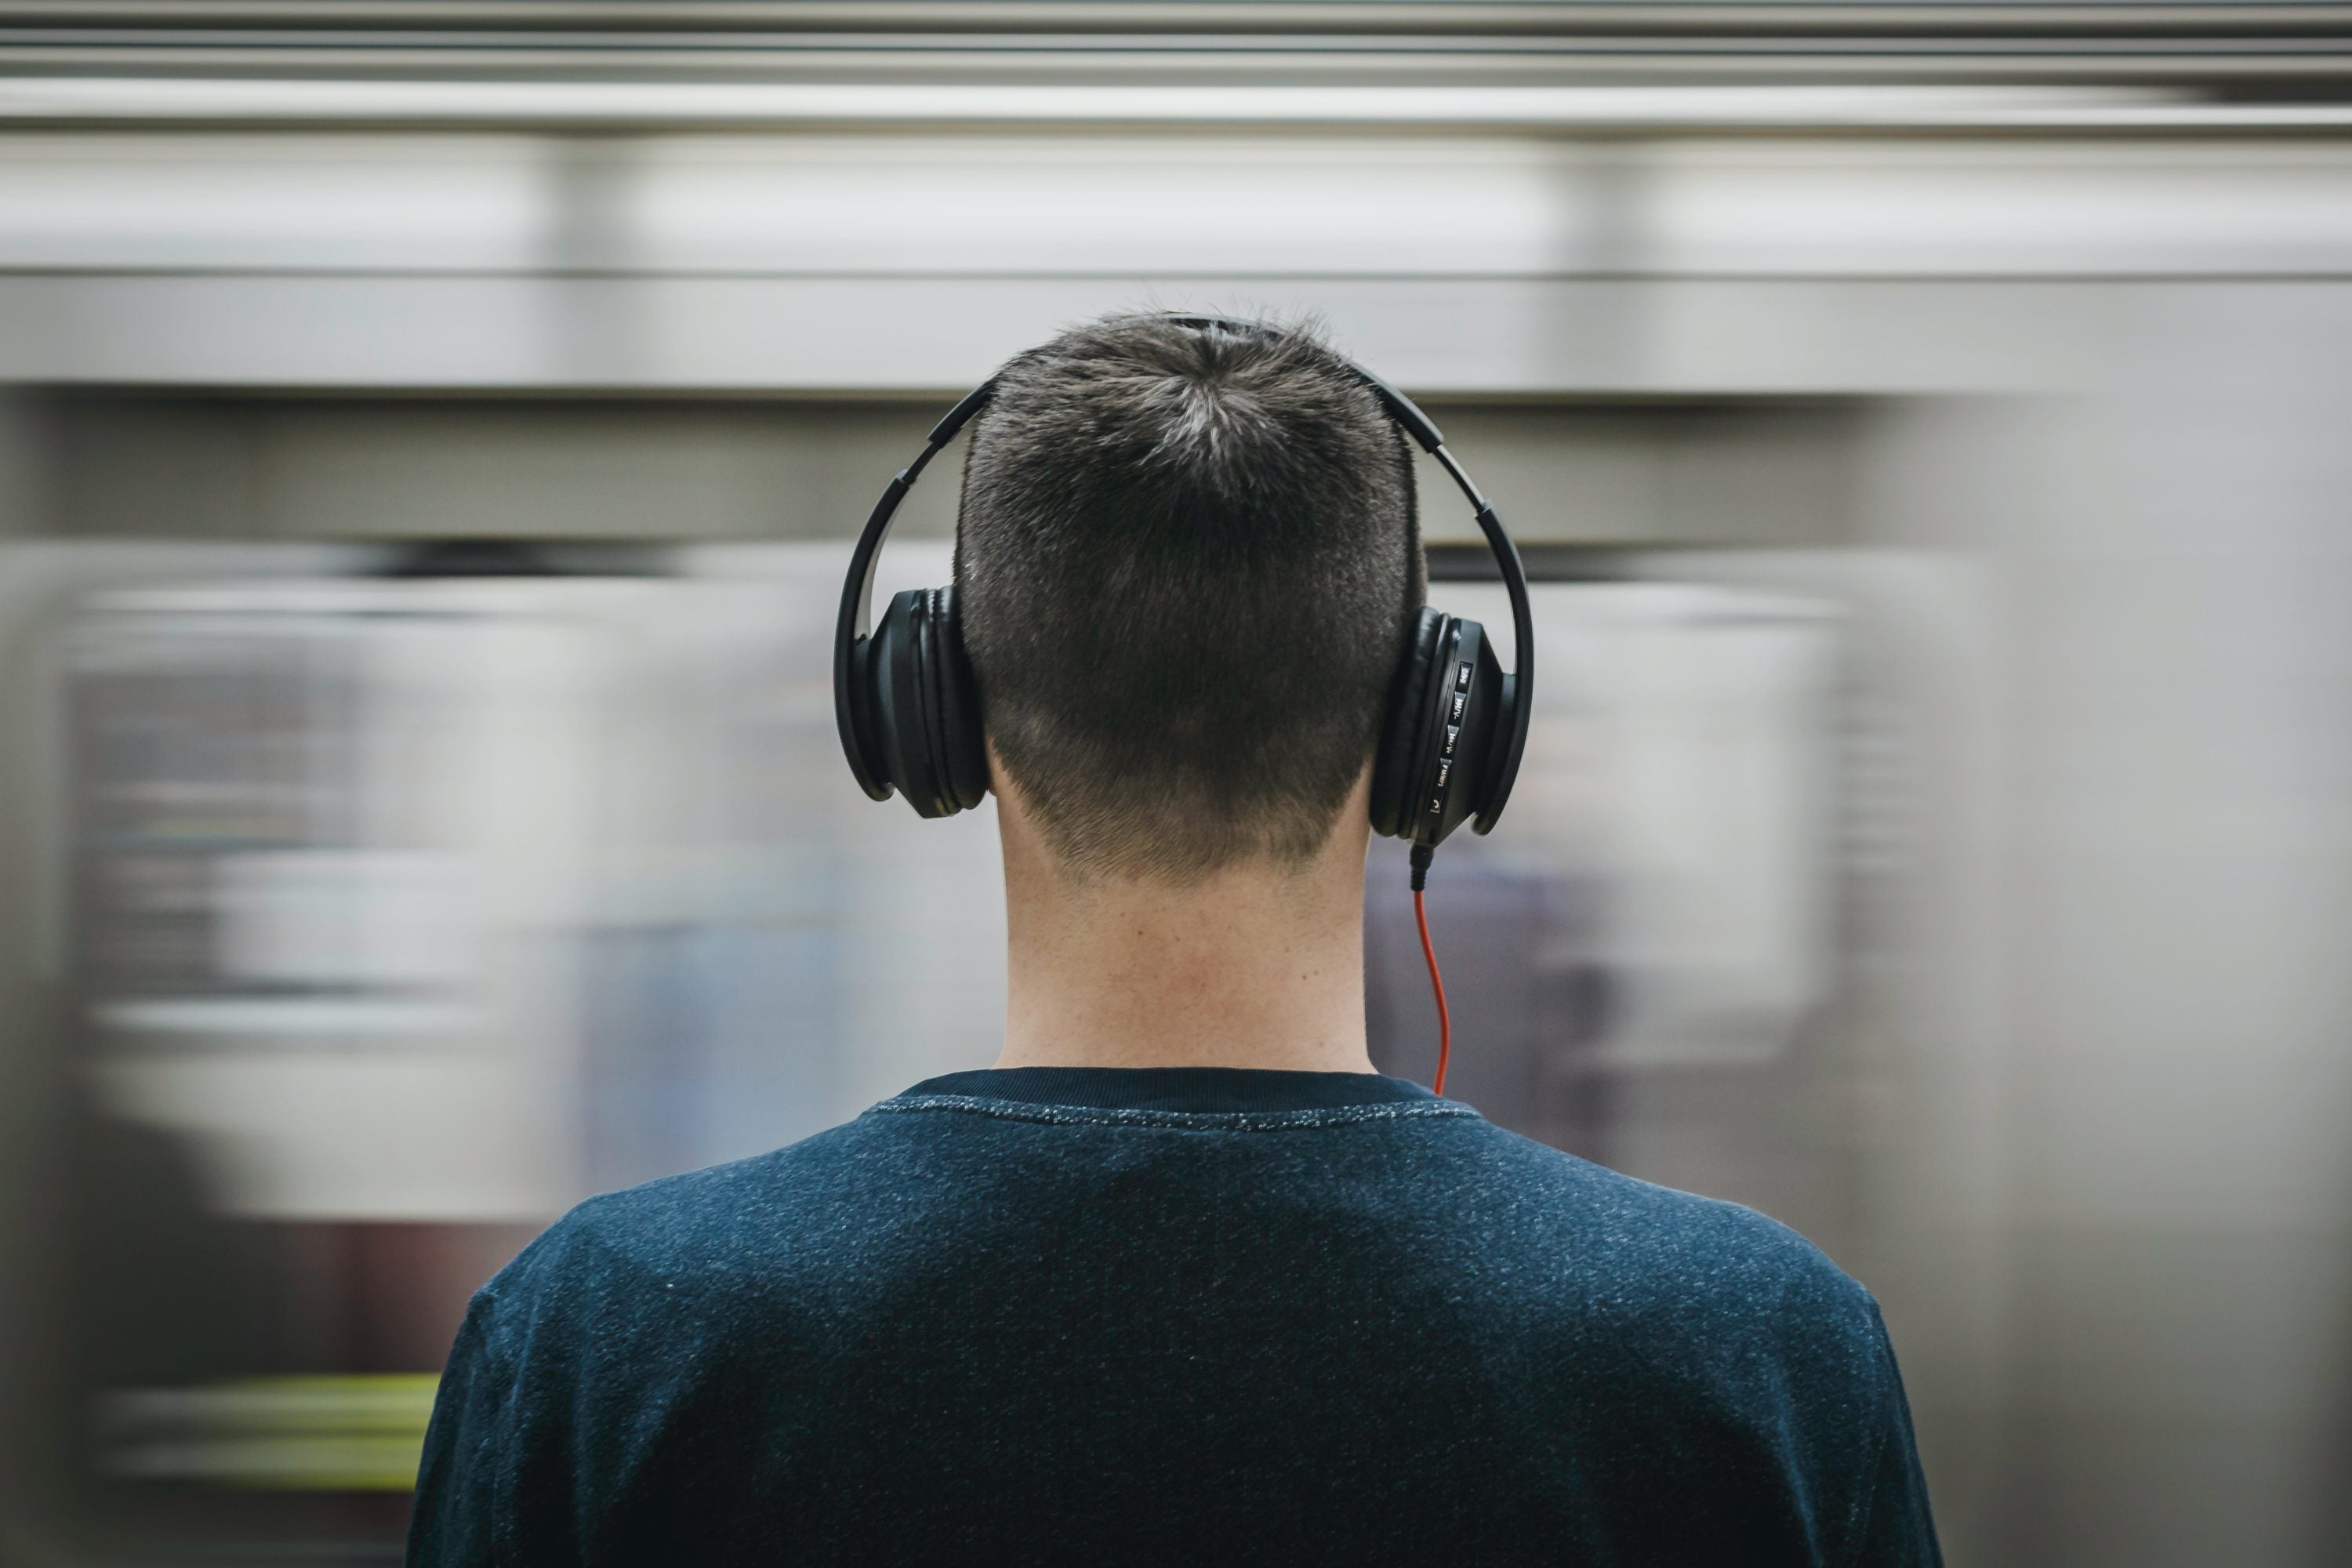 Top-Rated Noise-Cancelling Headphones for travel